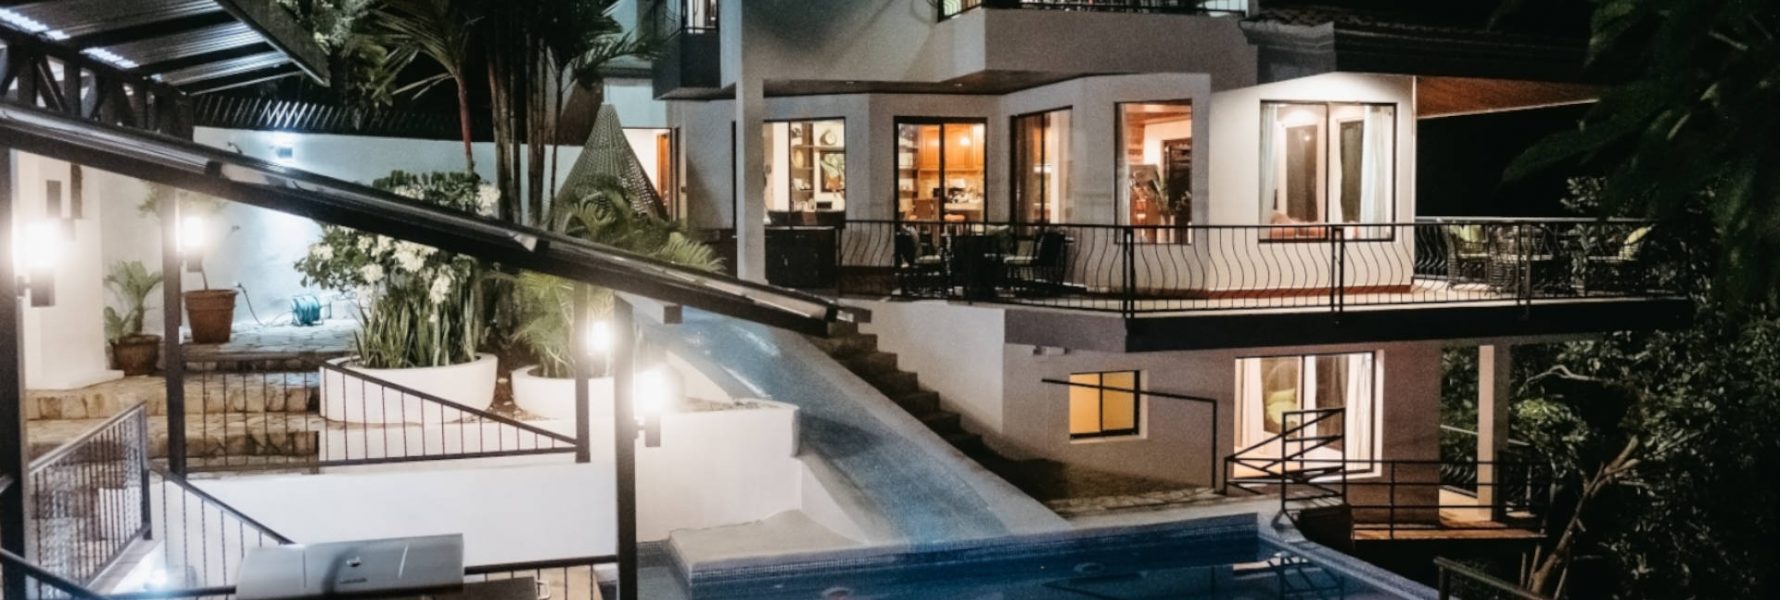 The pool area has recently been over doubled in size with amazing seating areas, new dining set, and covered rancho. The villa itself has been upgraded as well to make this a premier vacation home in Manuel Antonio.